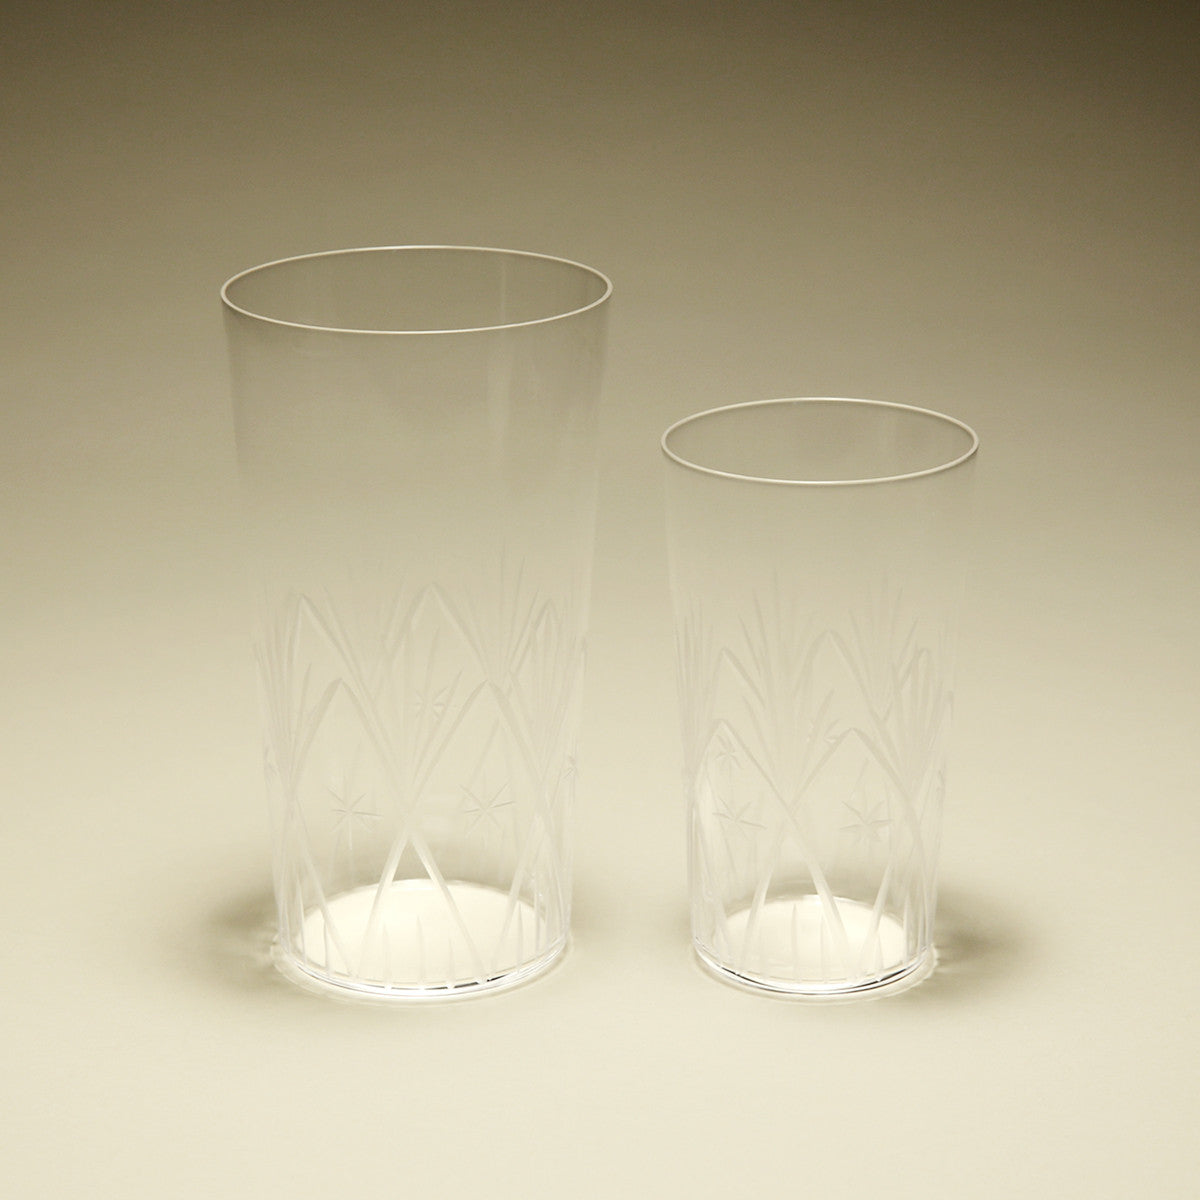 Etched Drinking Glass - Sheaf